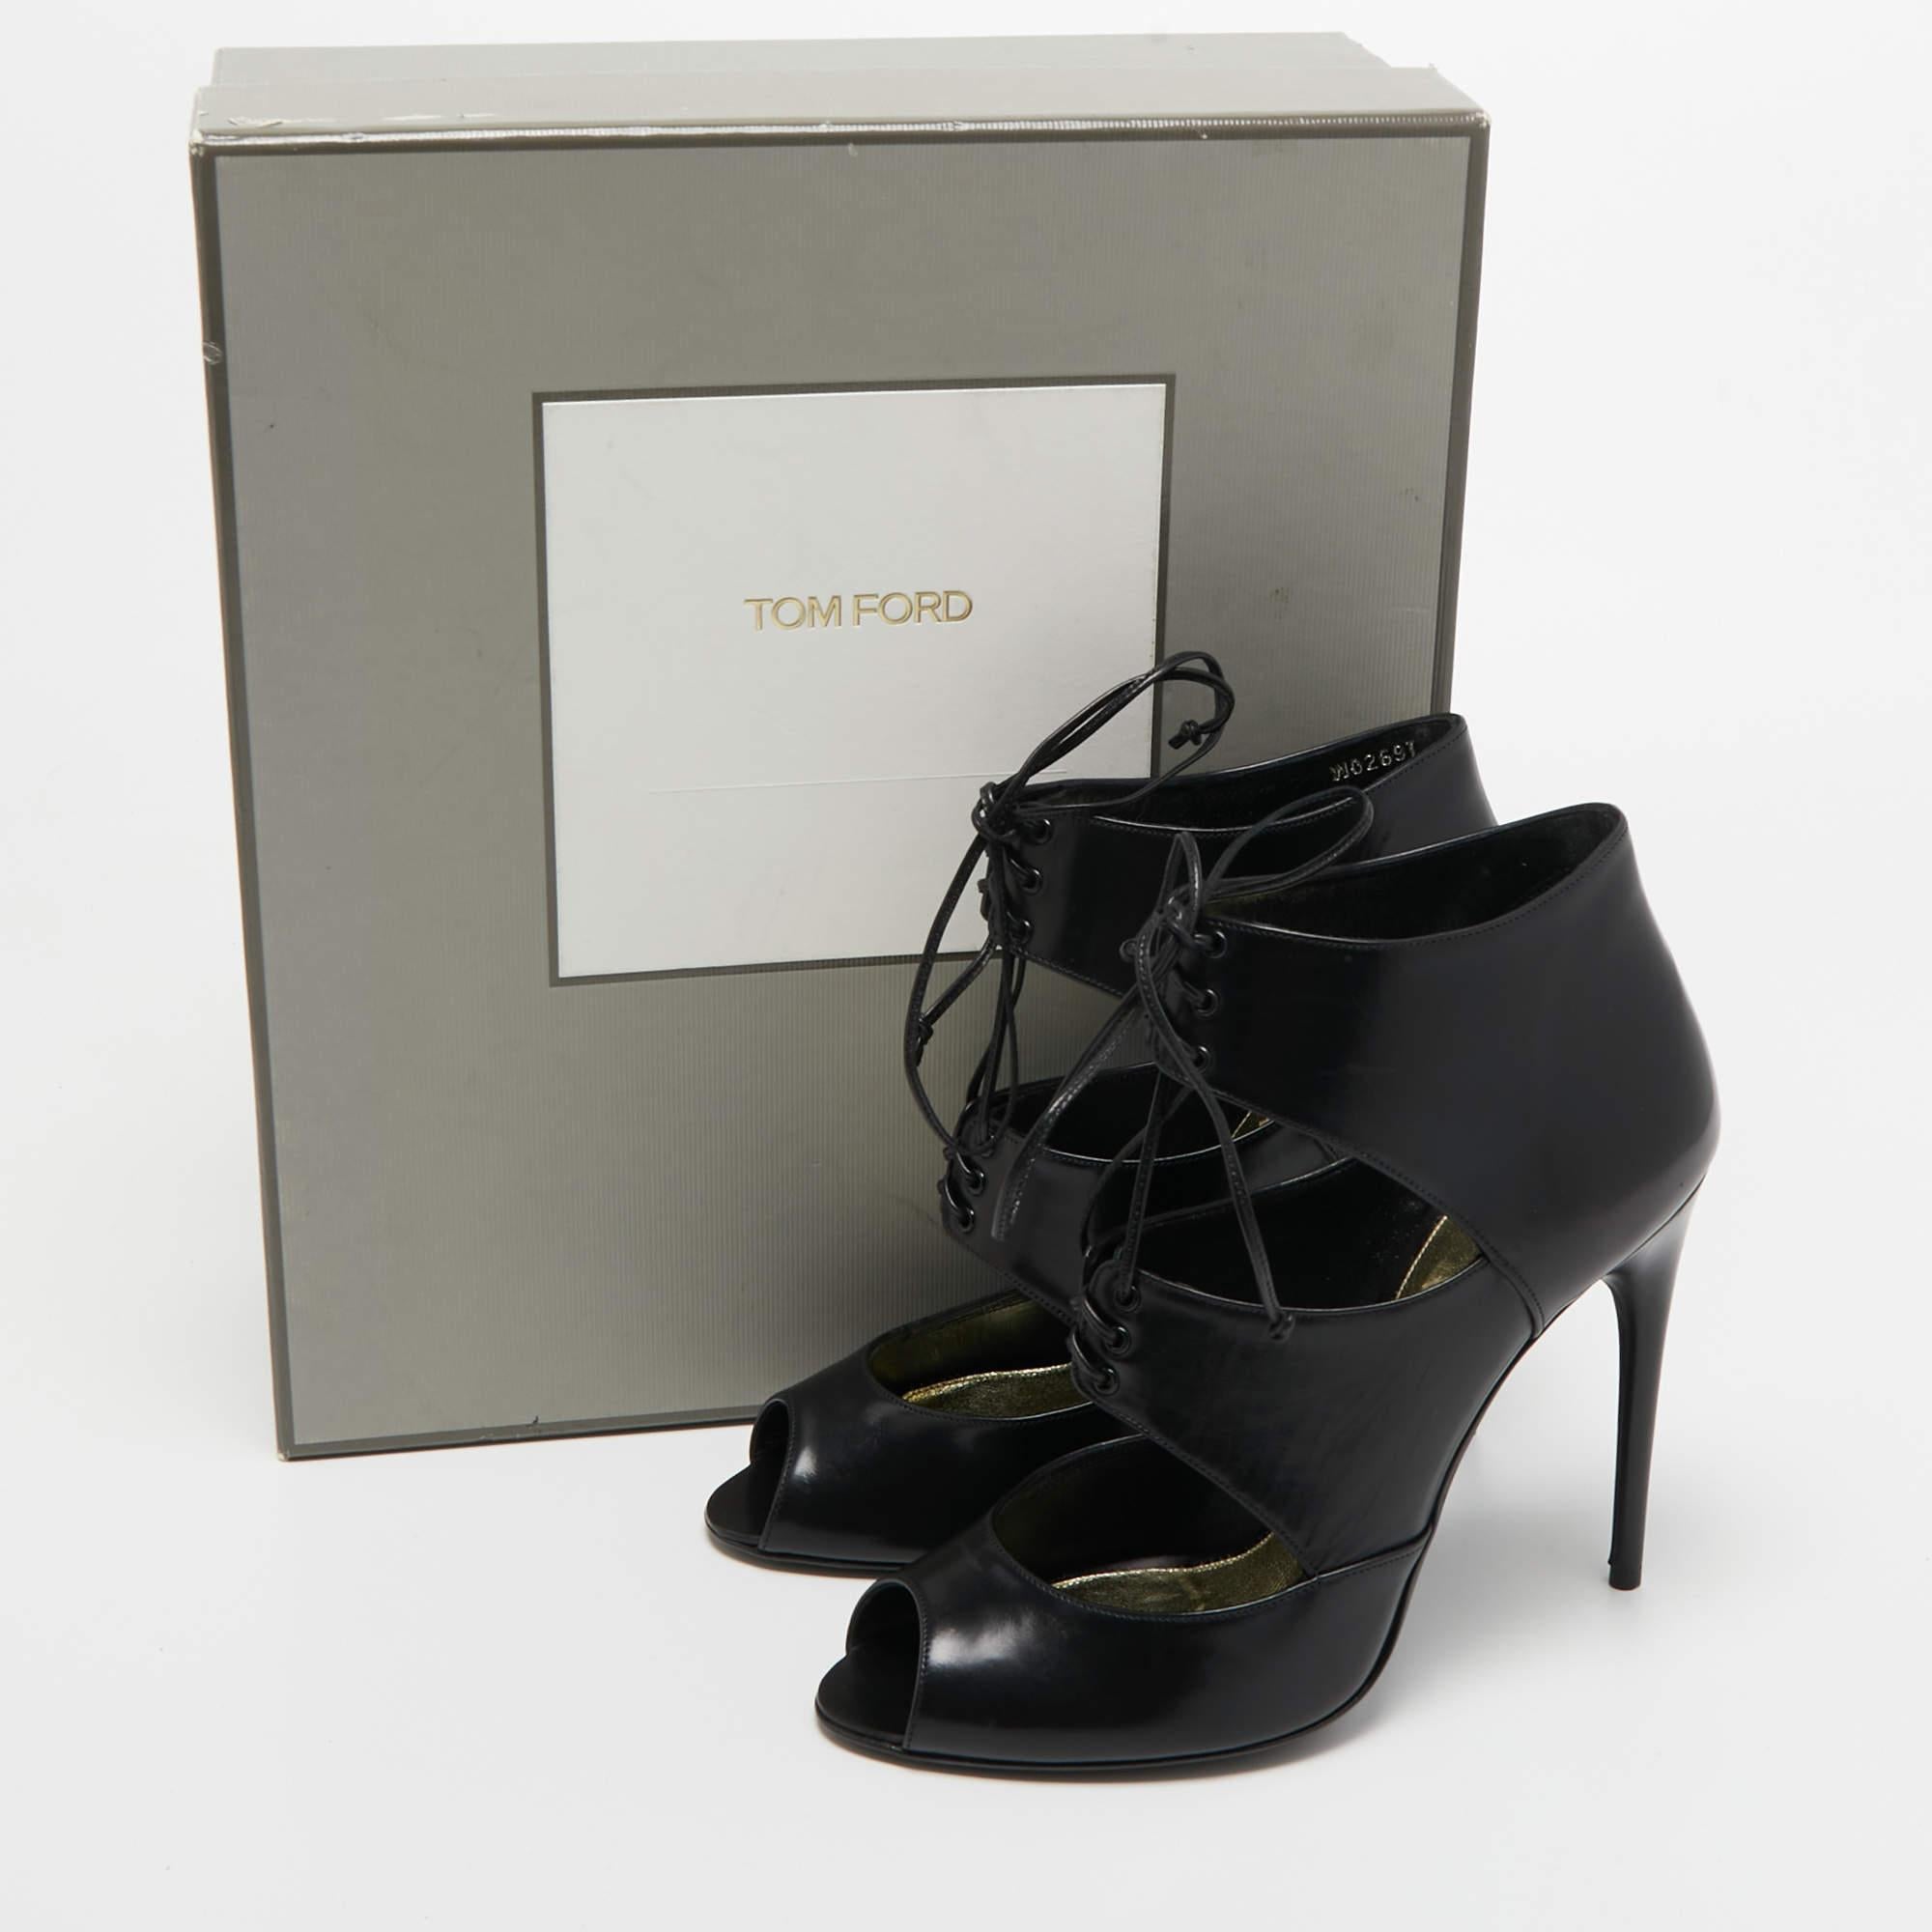 Tom Ford Black Leather Peep Toe Ankle Booties Size 39.5 5